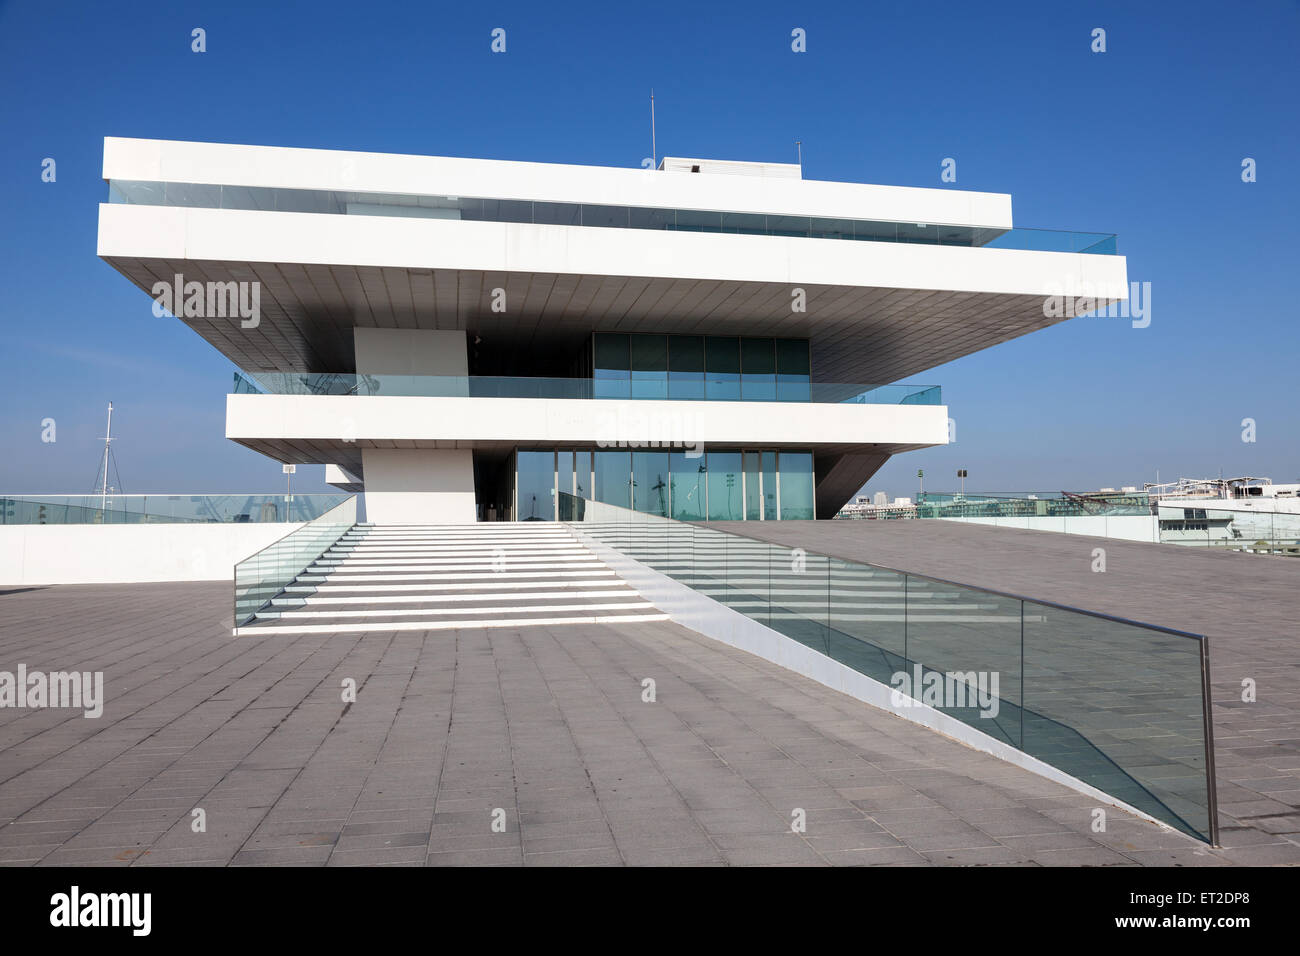 Americas Cup or (Veles e Vents) building in the port of Valencia. May 24, 2015 in Valencia, Spain Stock Photo